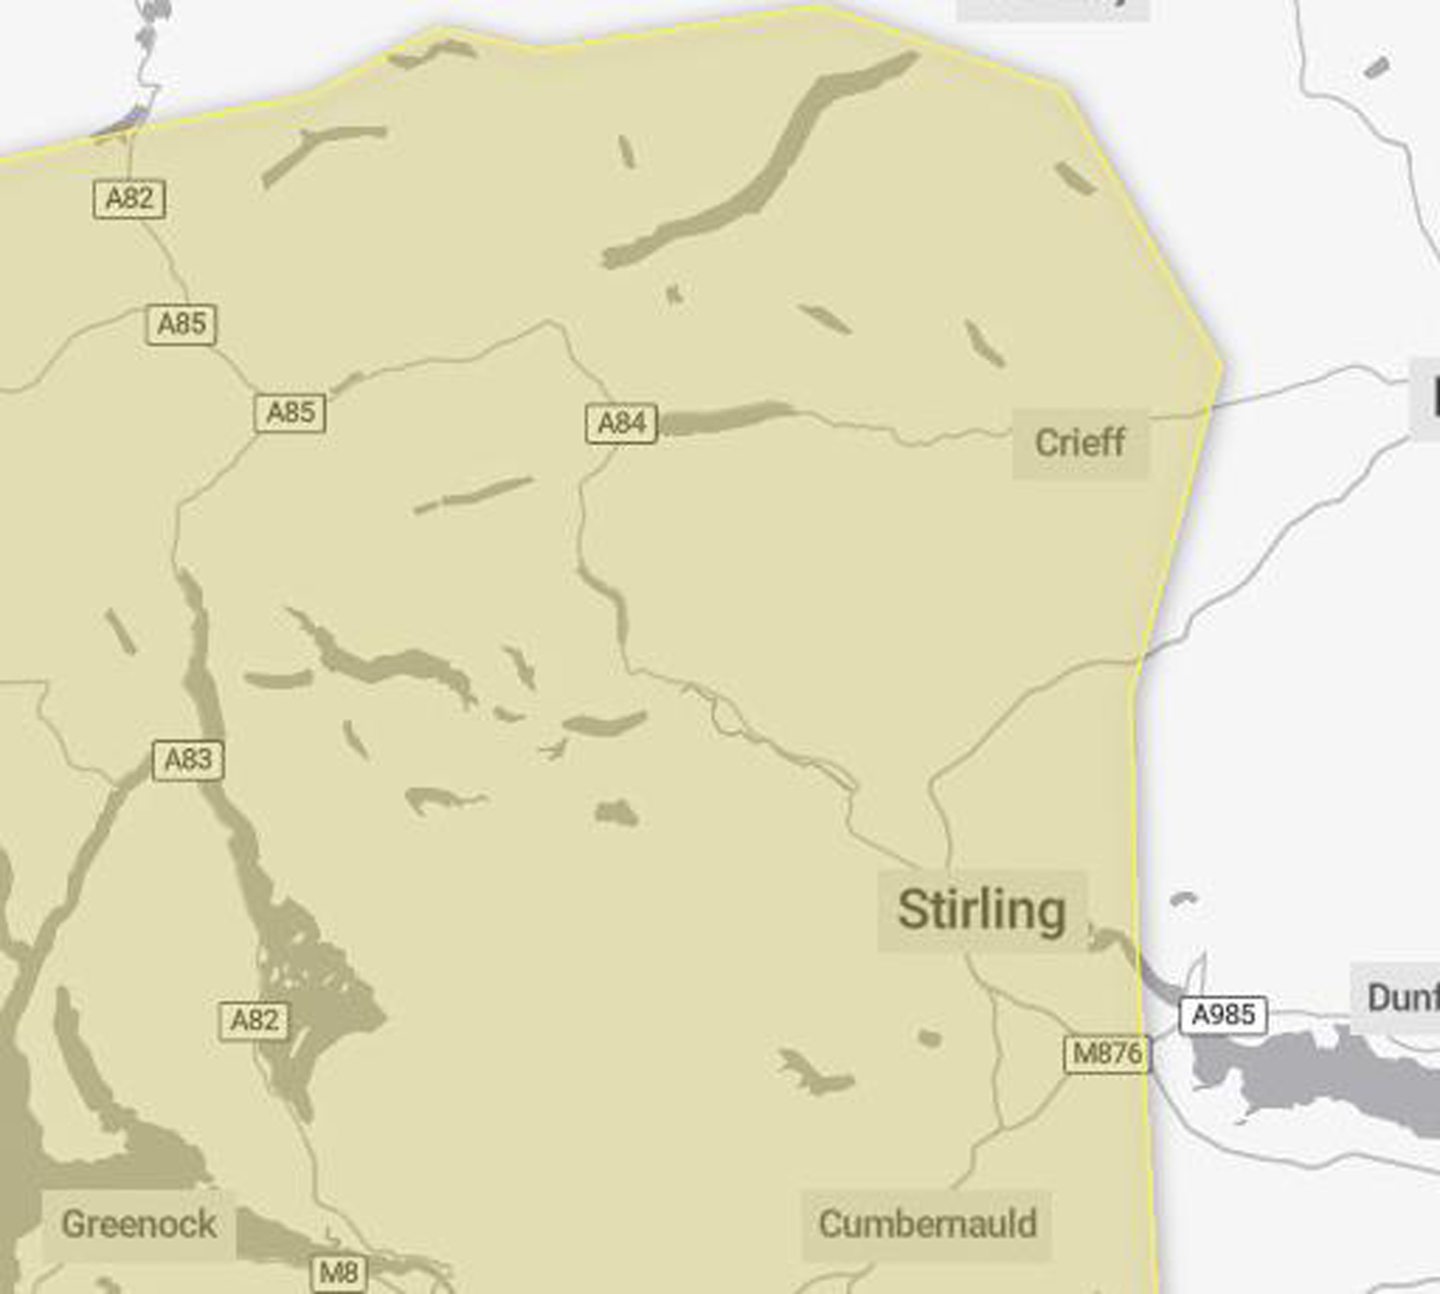 Parts of Perthshire and Stirling are covered by the warning.